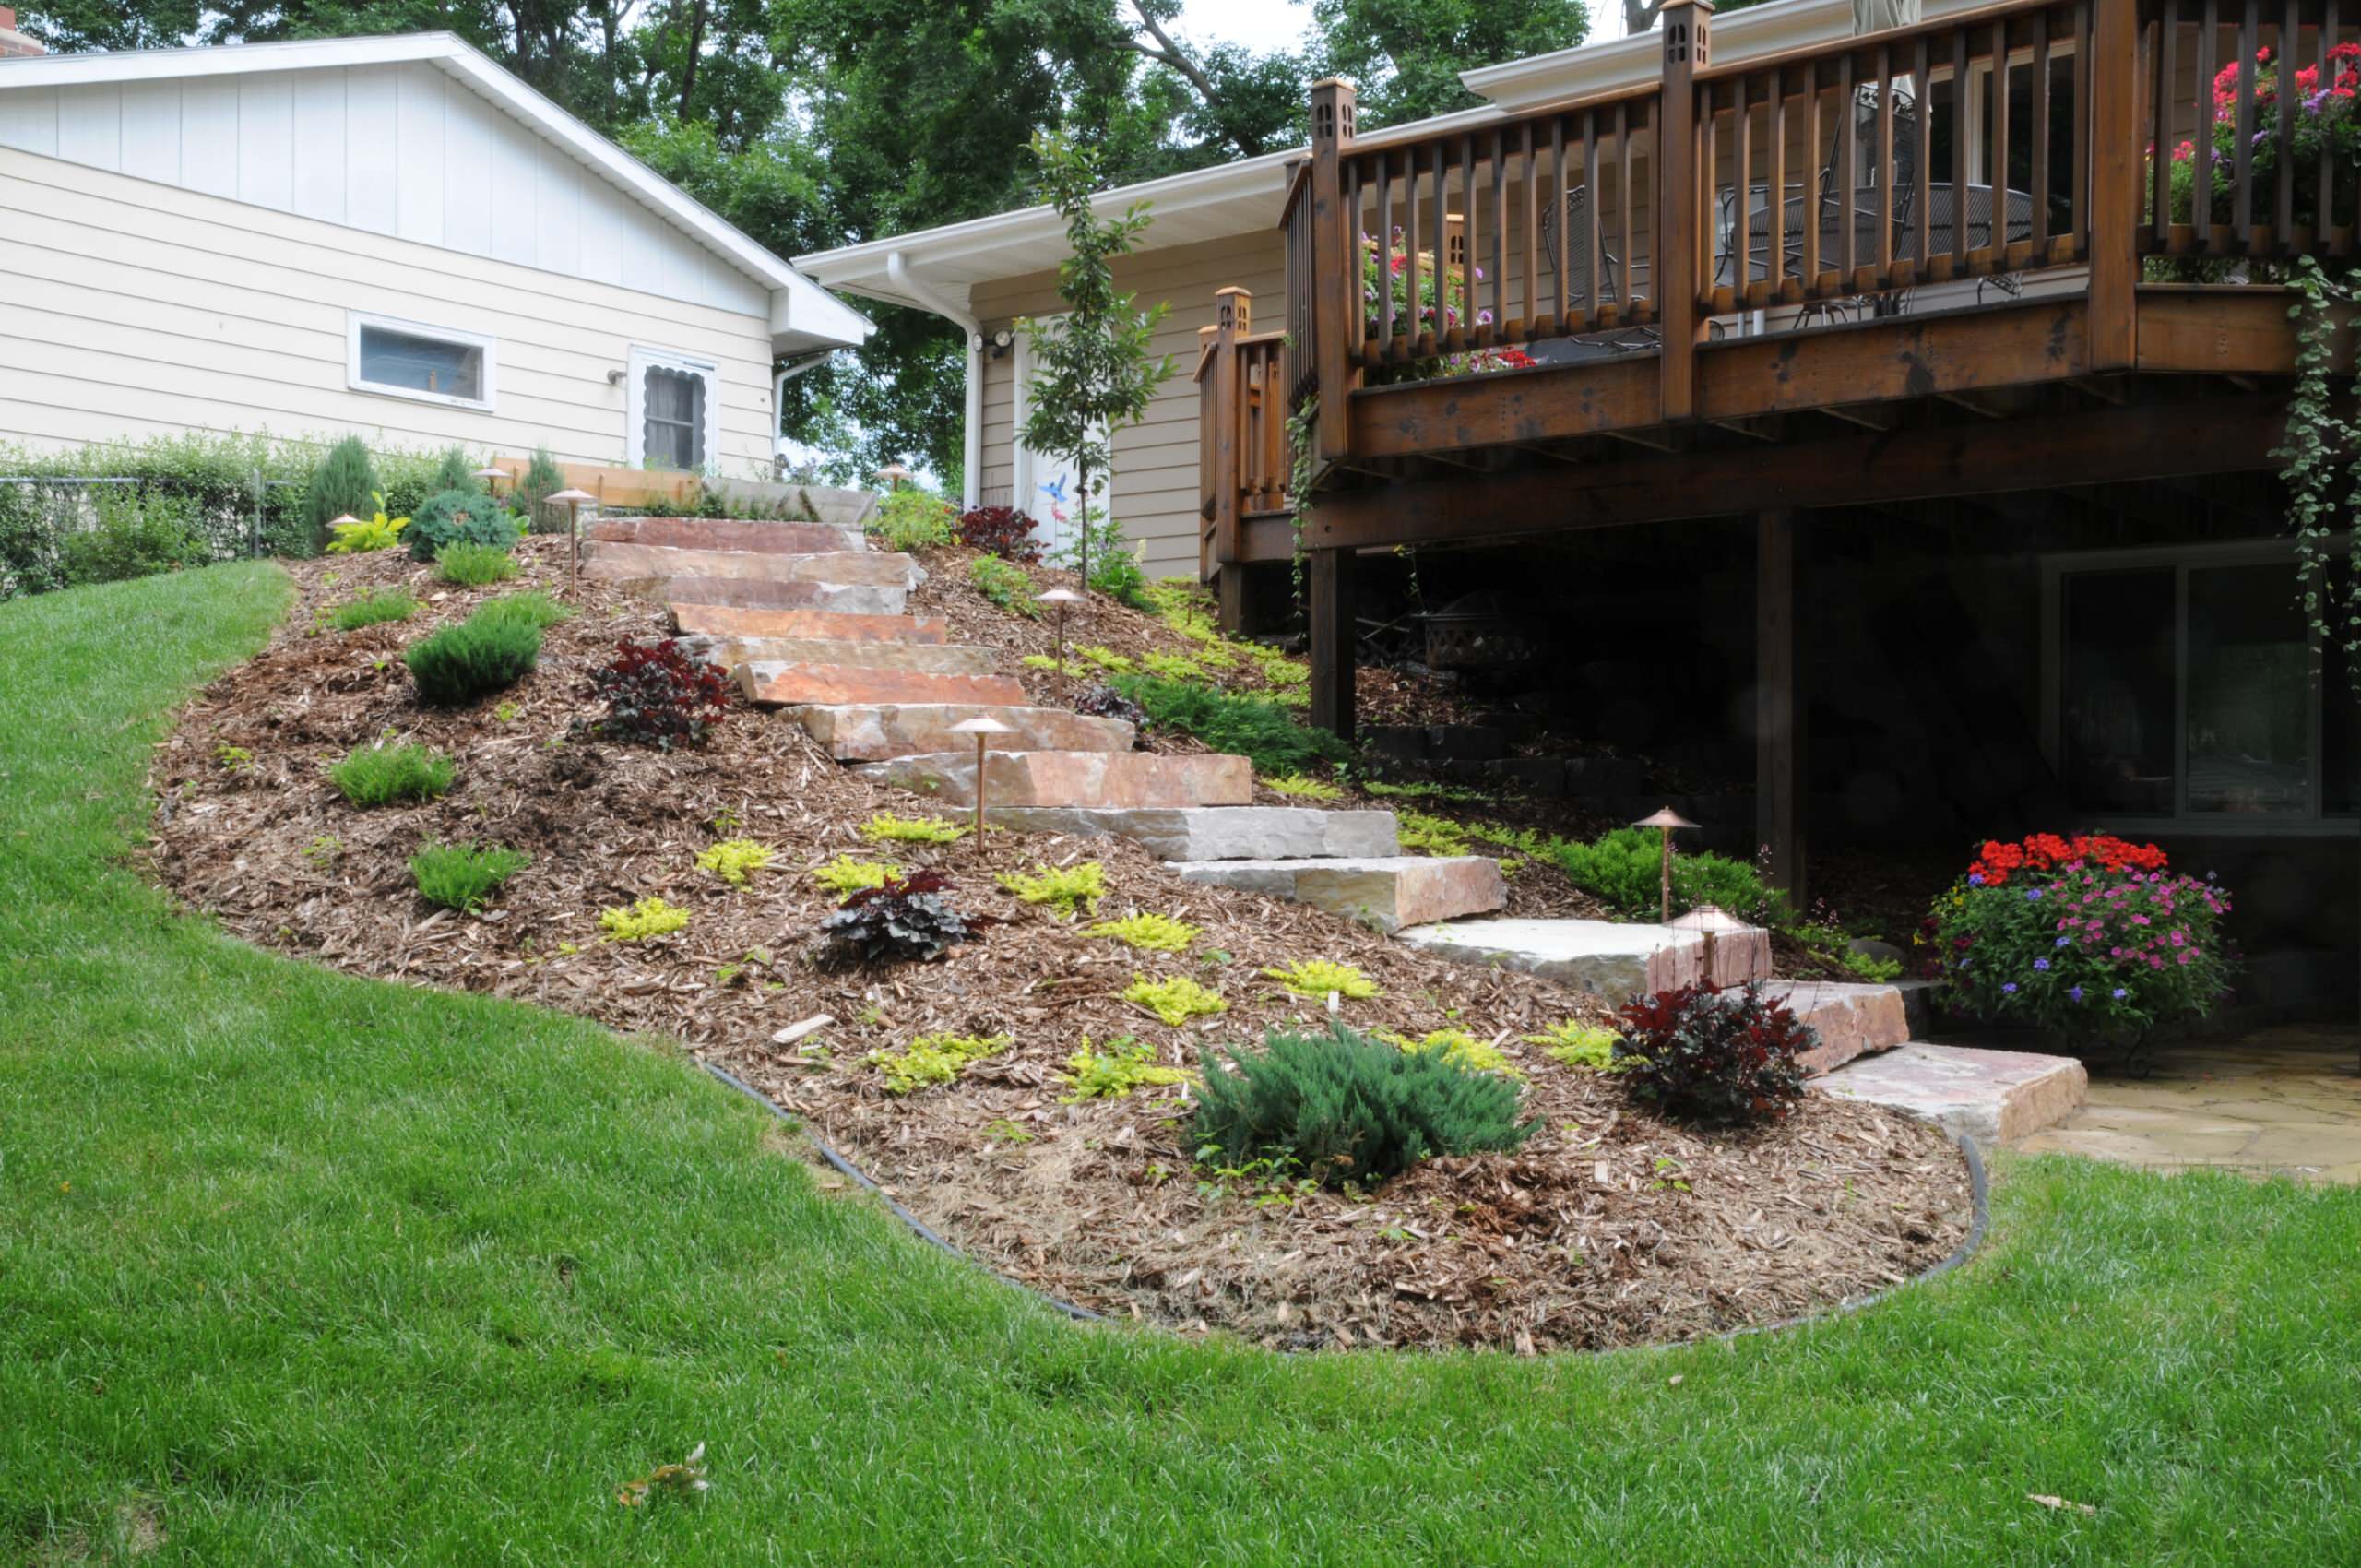  sloping backyard landscaping ideas pictures